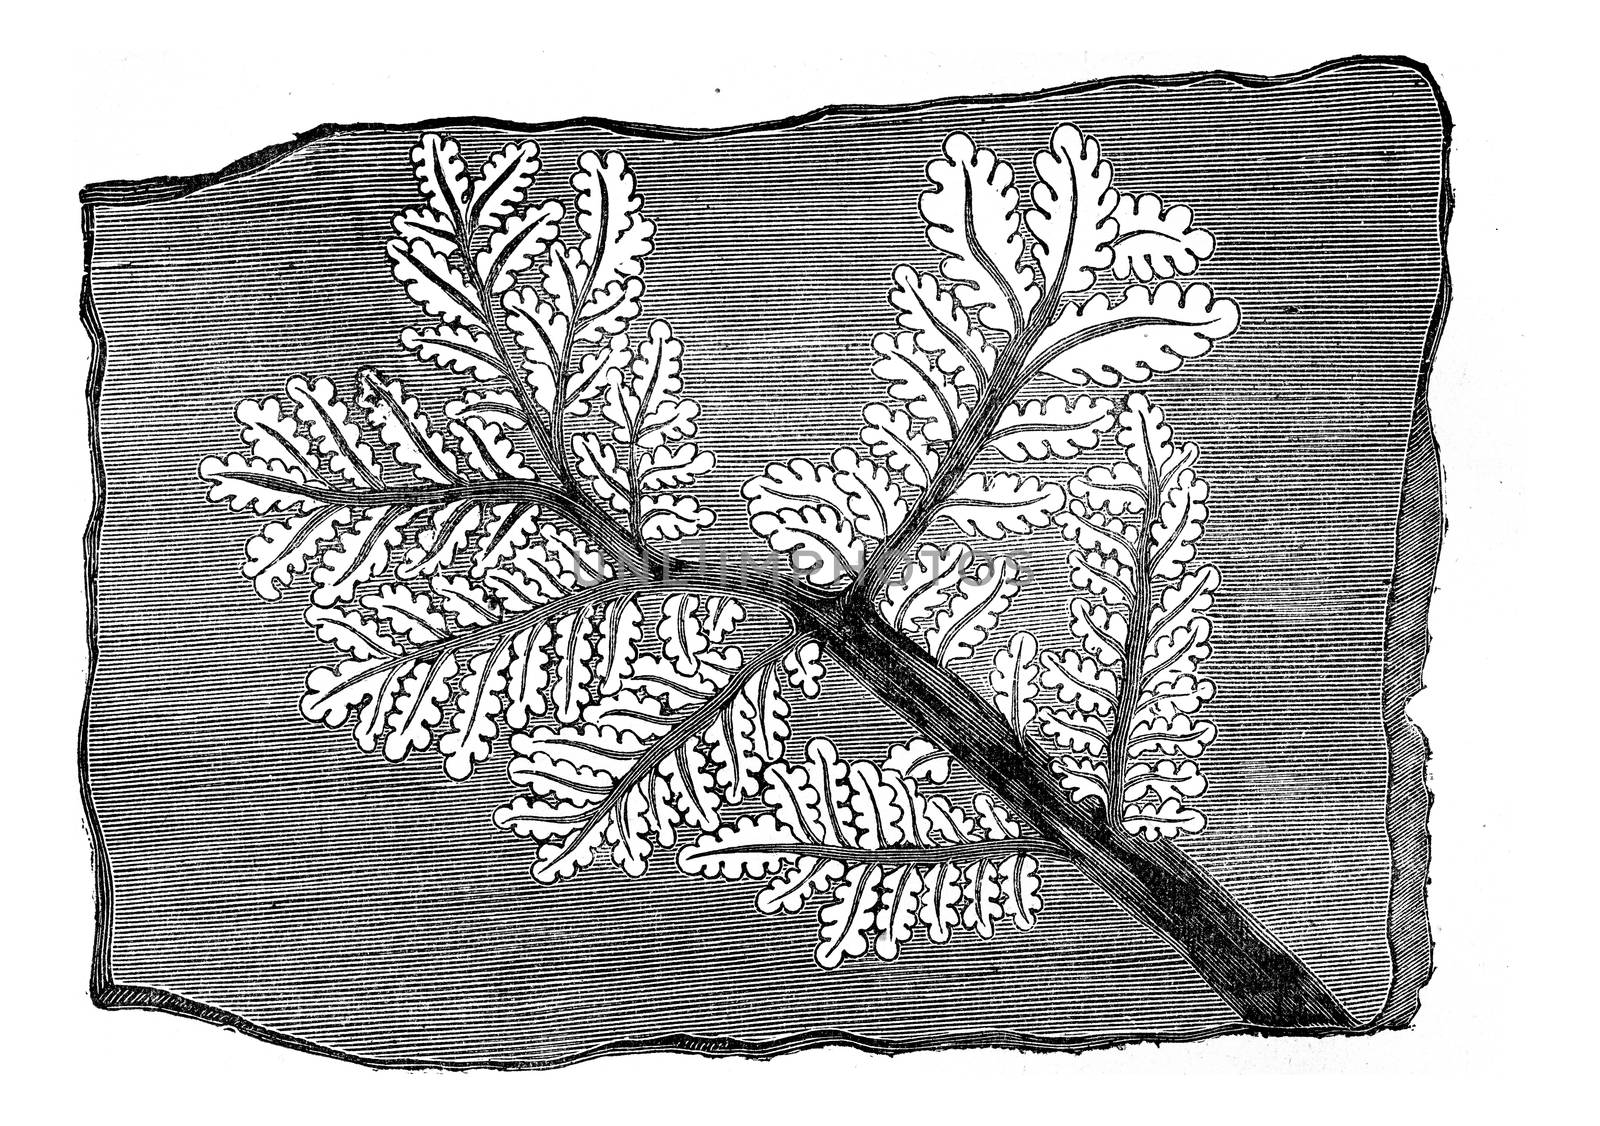 Trace fossil fern, vintage engraved illustration. Earth before man – 1886.
